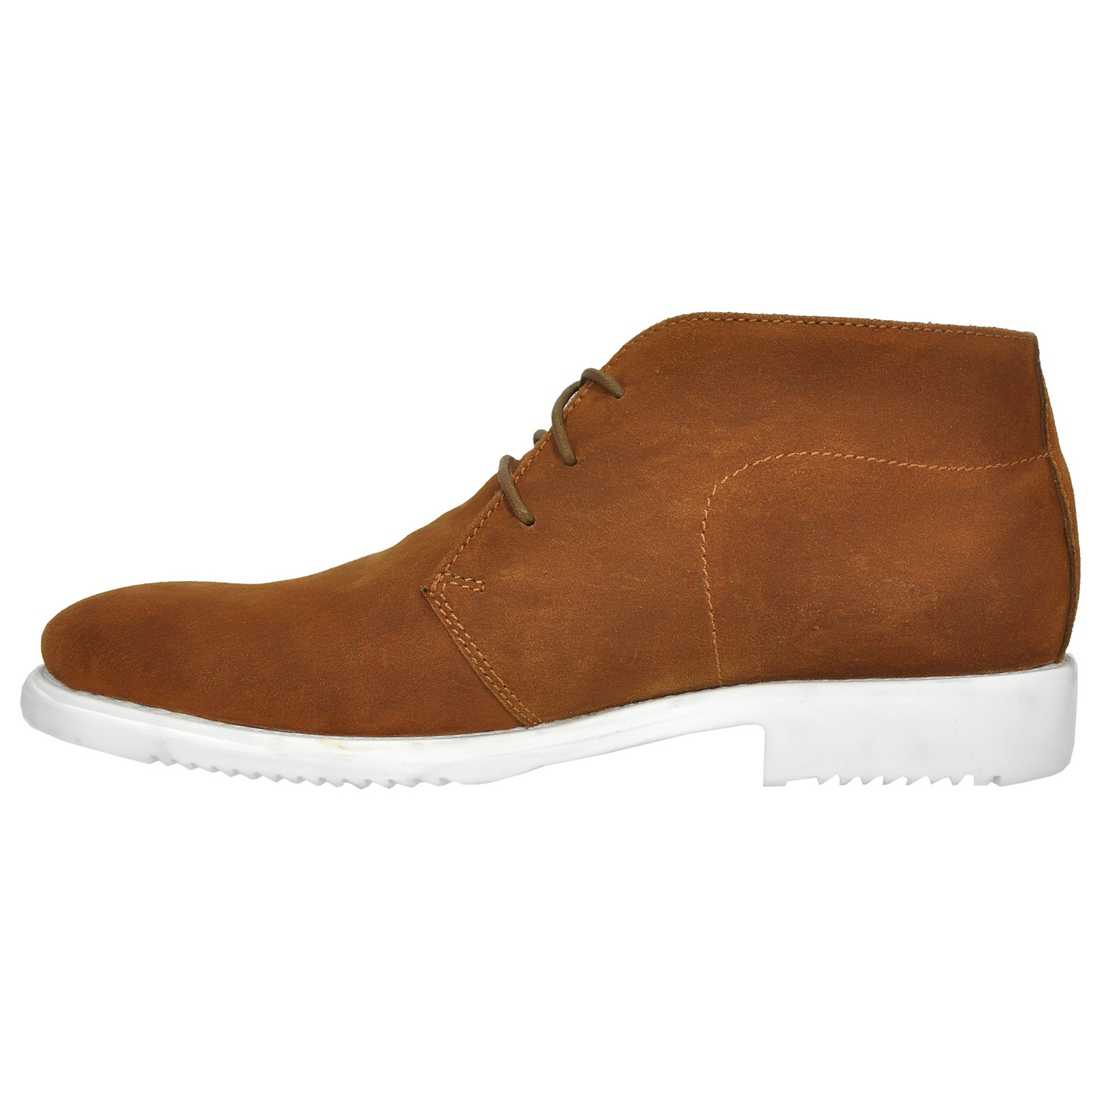 OHM New York American Lifestyle Leather Ankle Boots